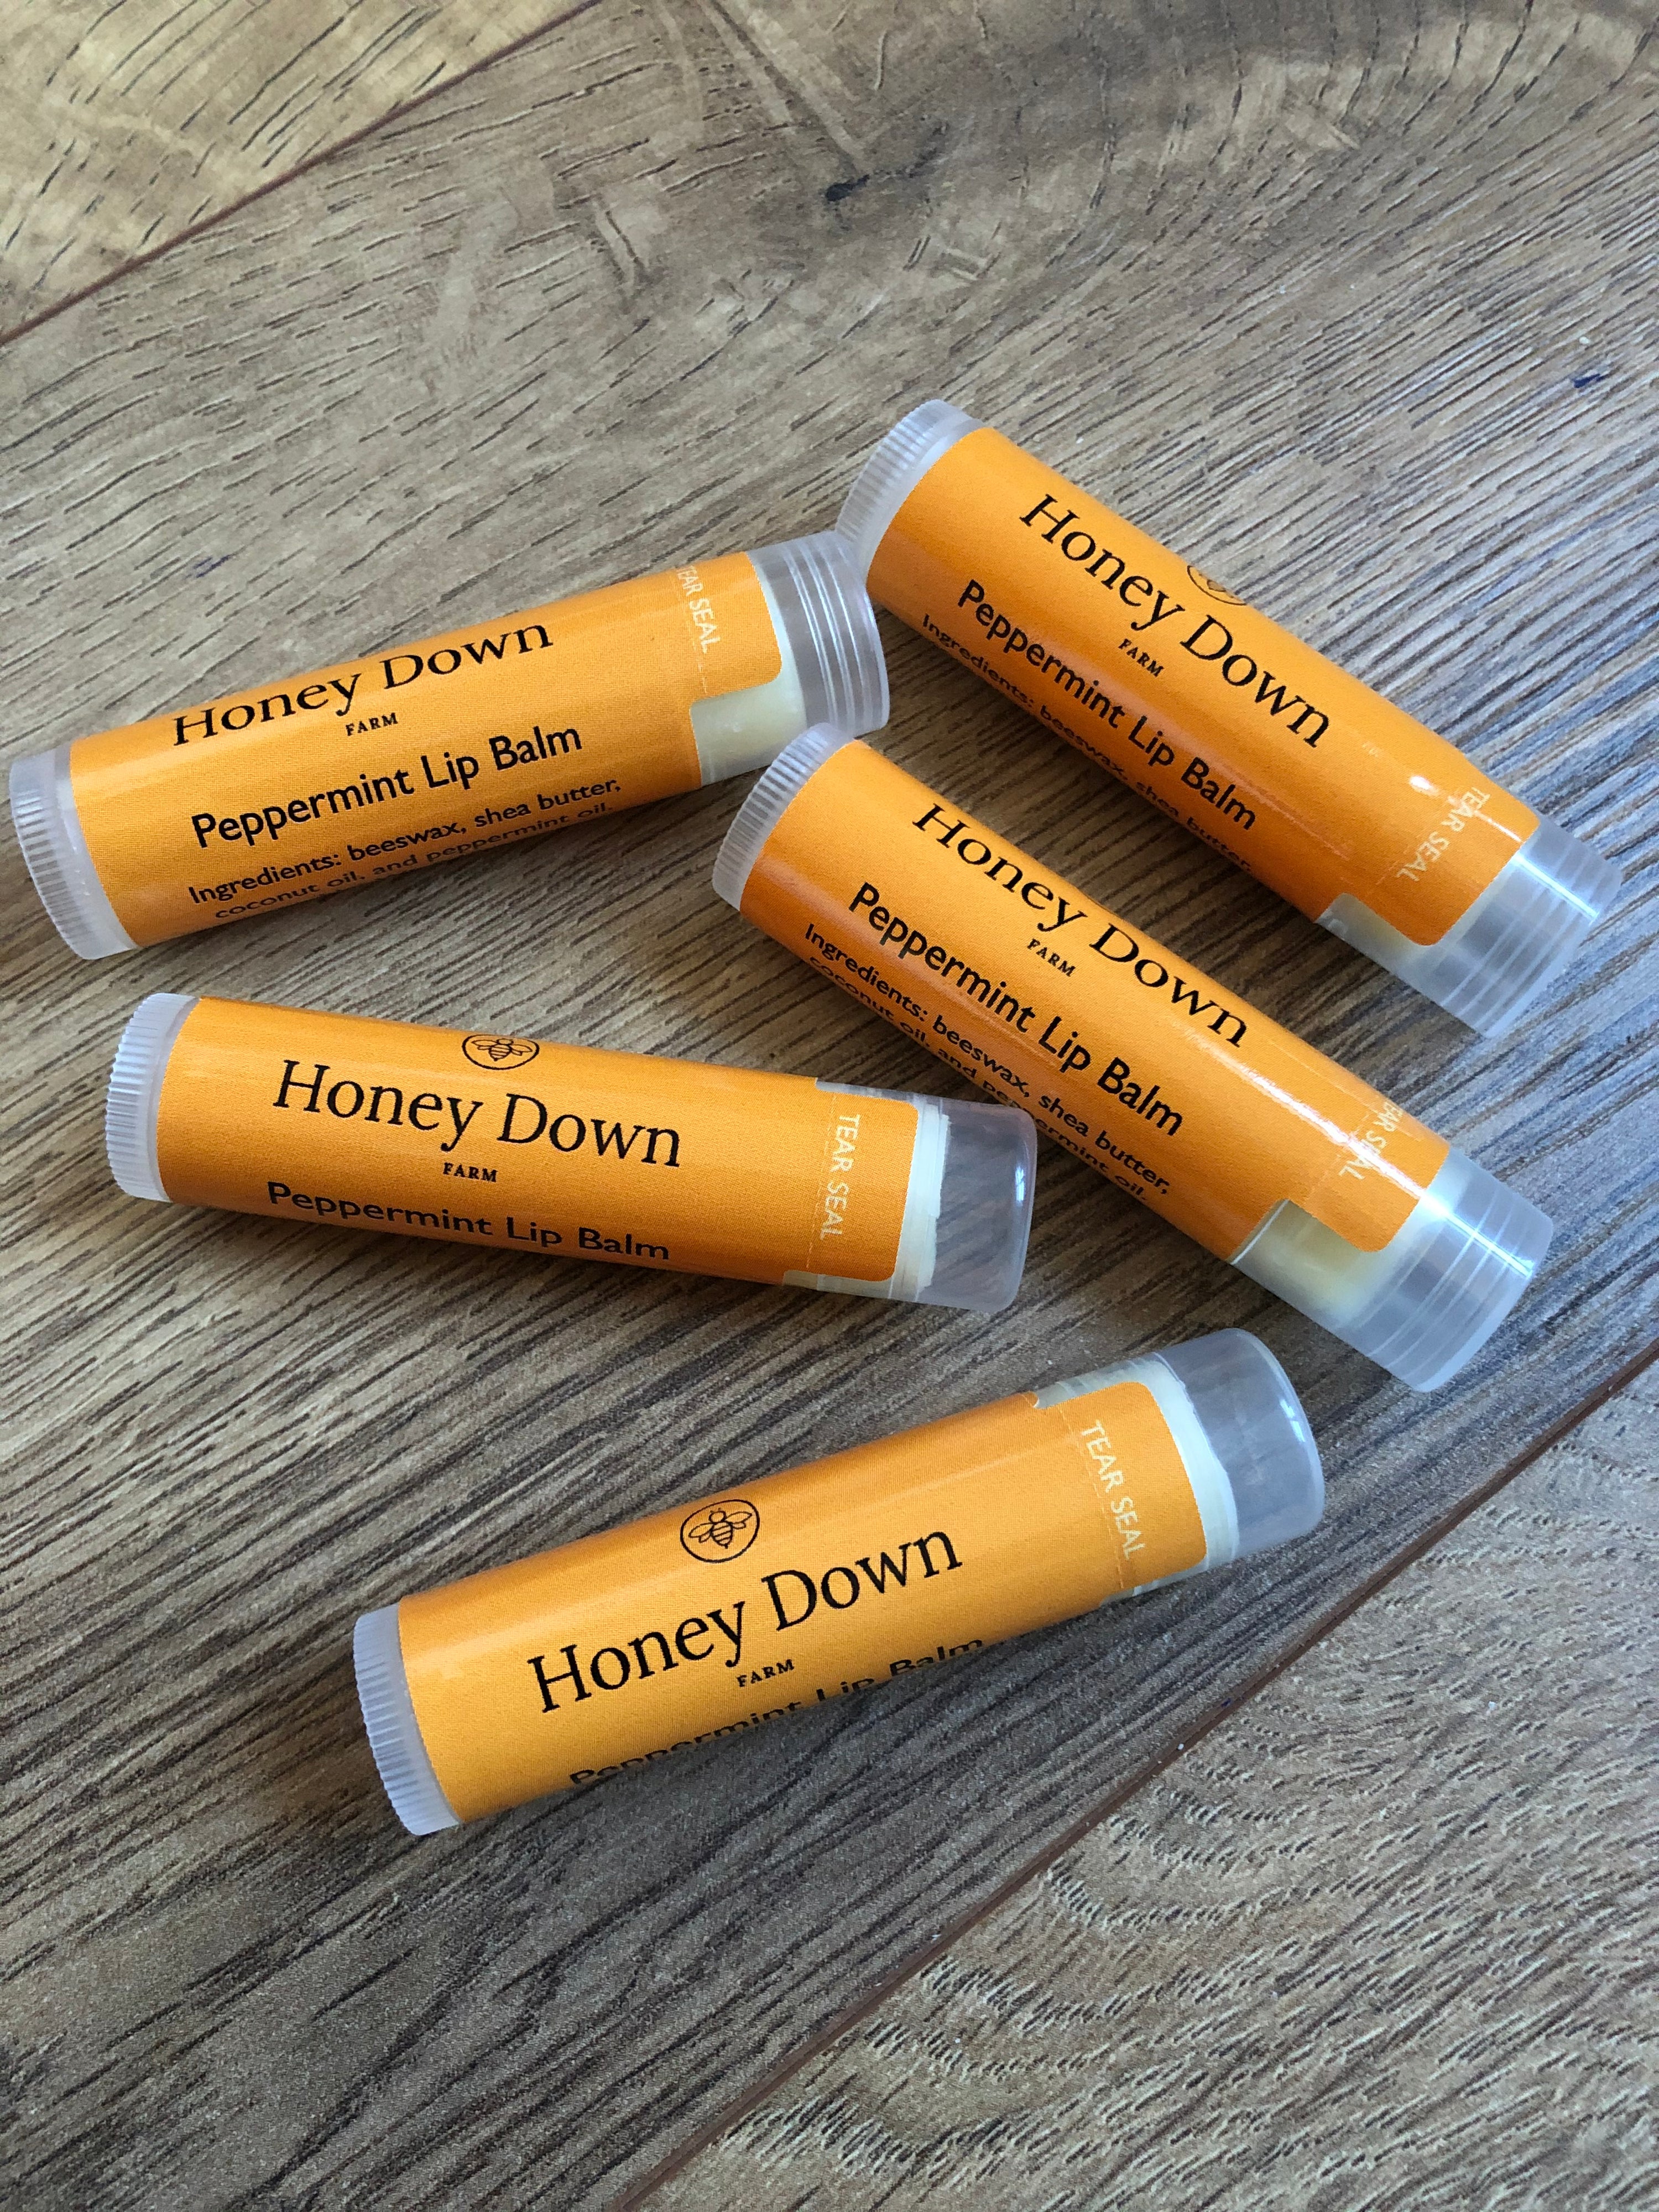 Discover the Therapeutic Benefits of Beeswax – Honey Down Farm